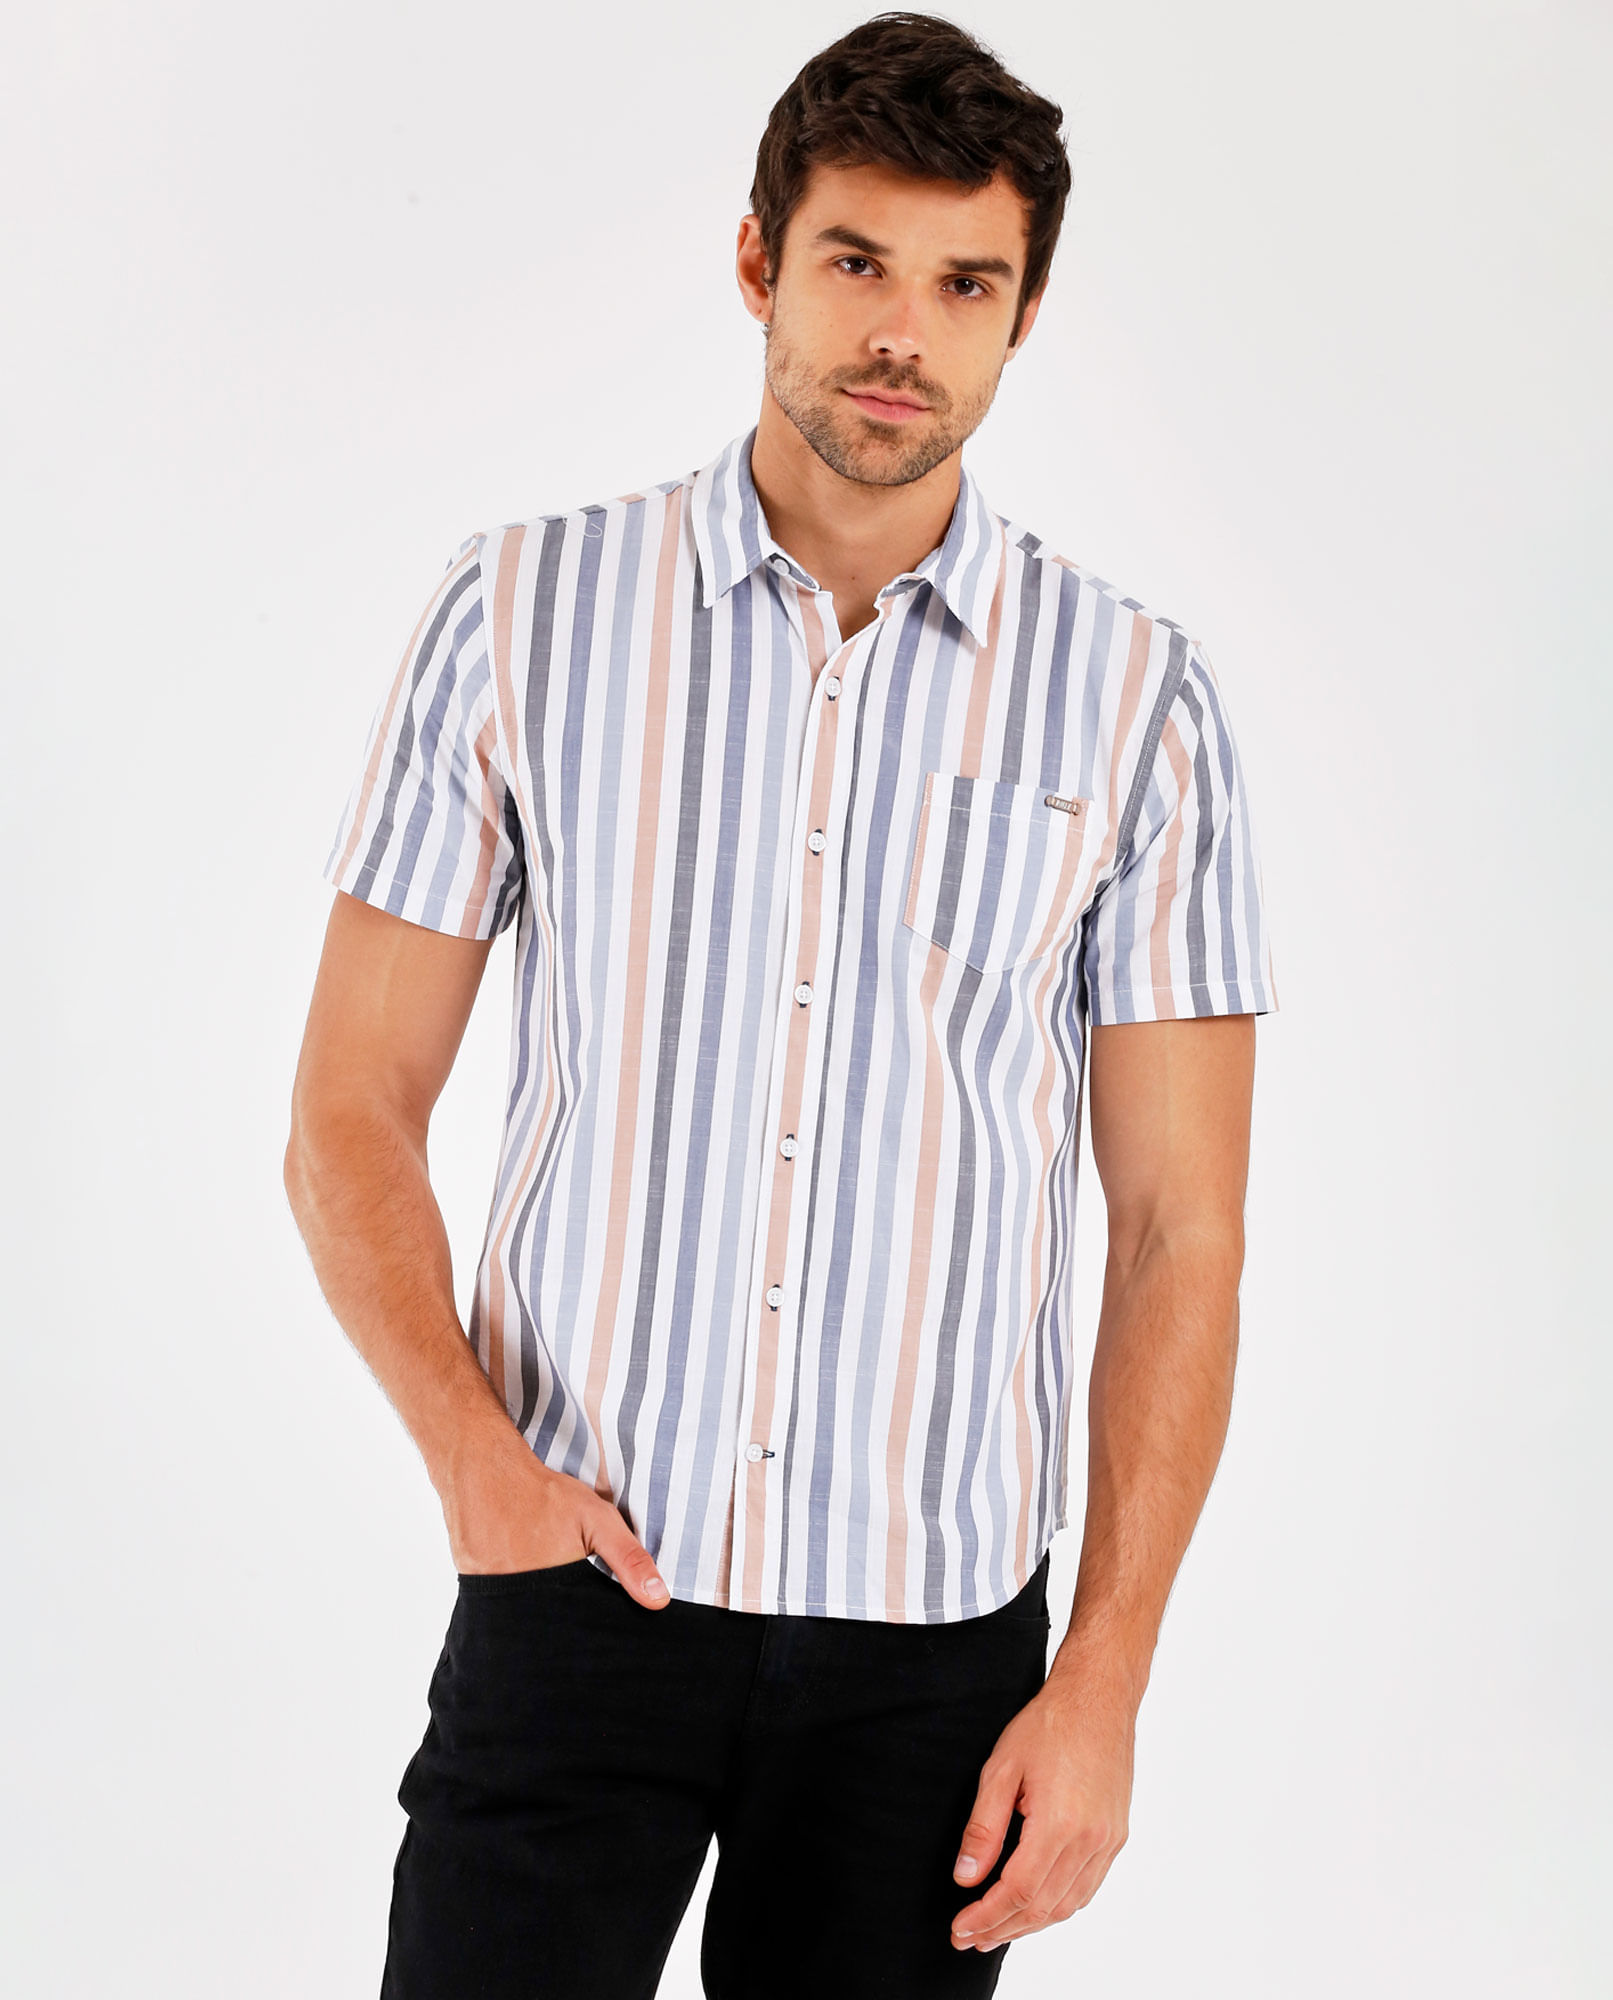 Ropa - 50% - Hombre - Outlet